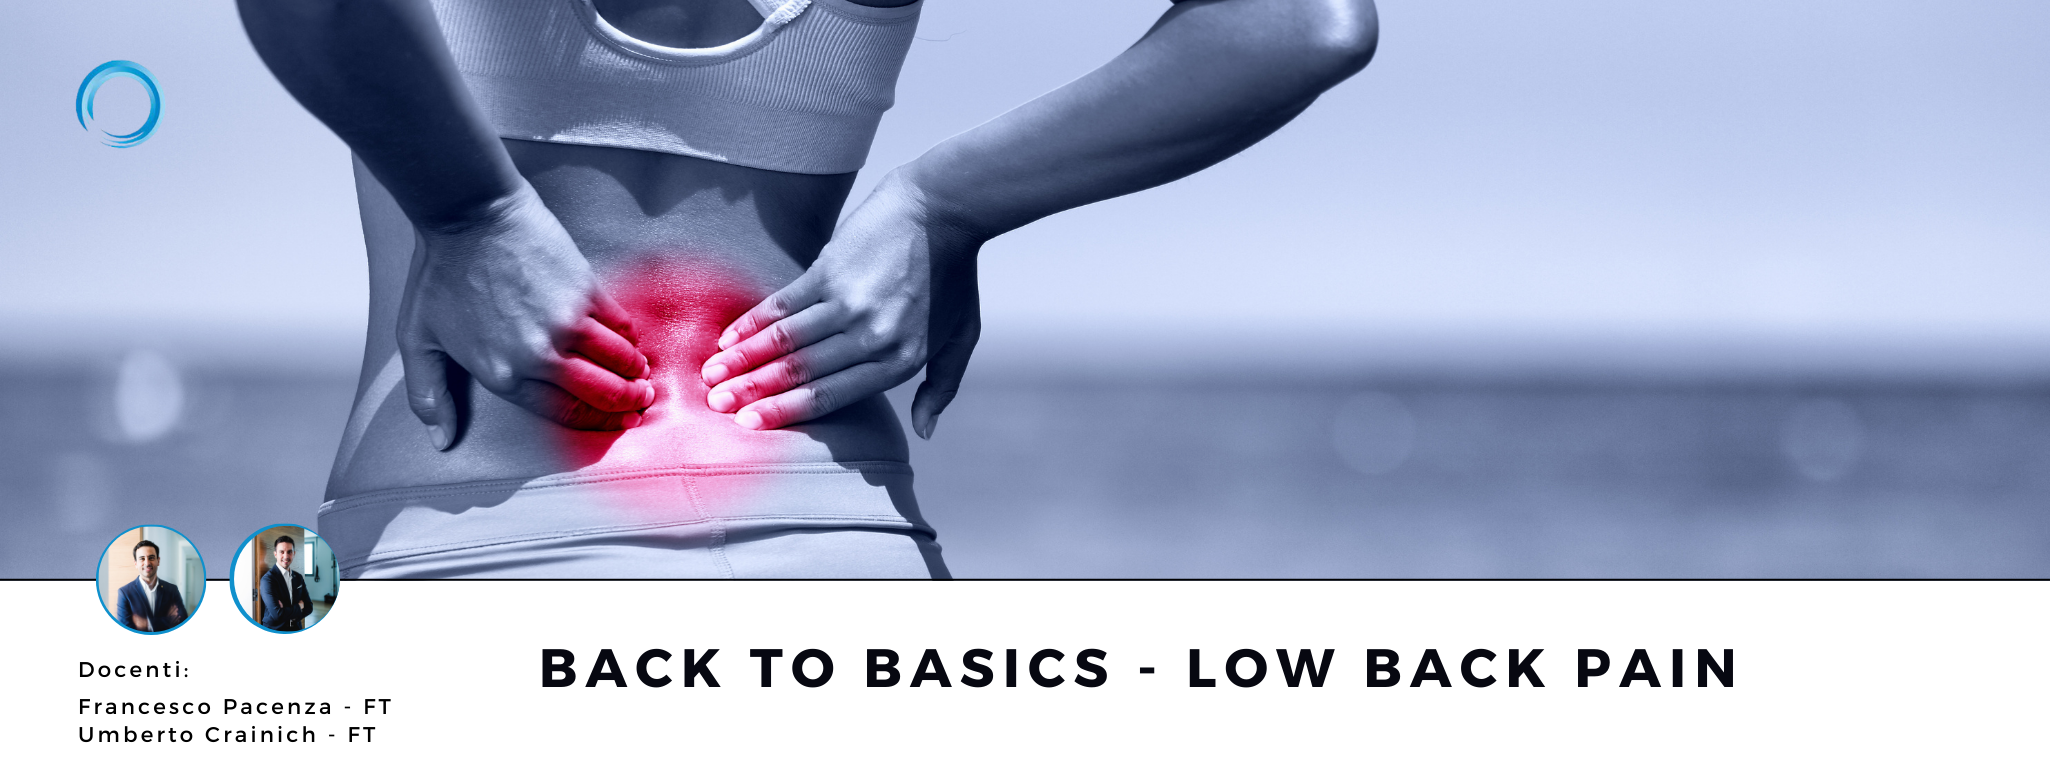 BACK TO ACTION - LOW BACK PAIN